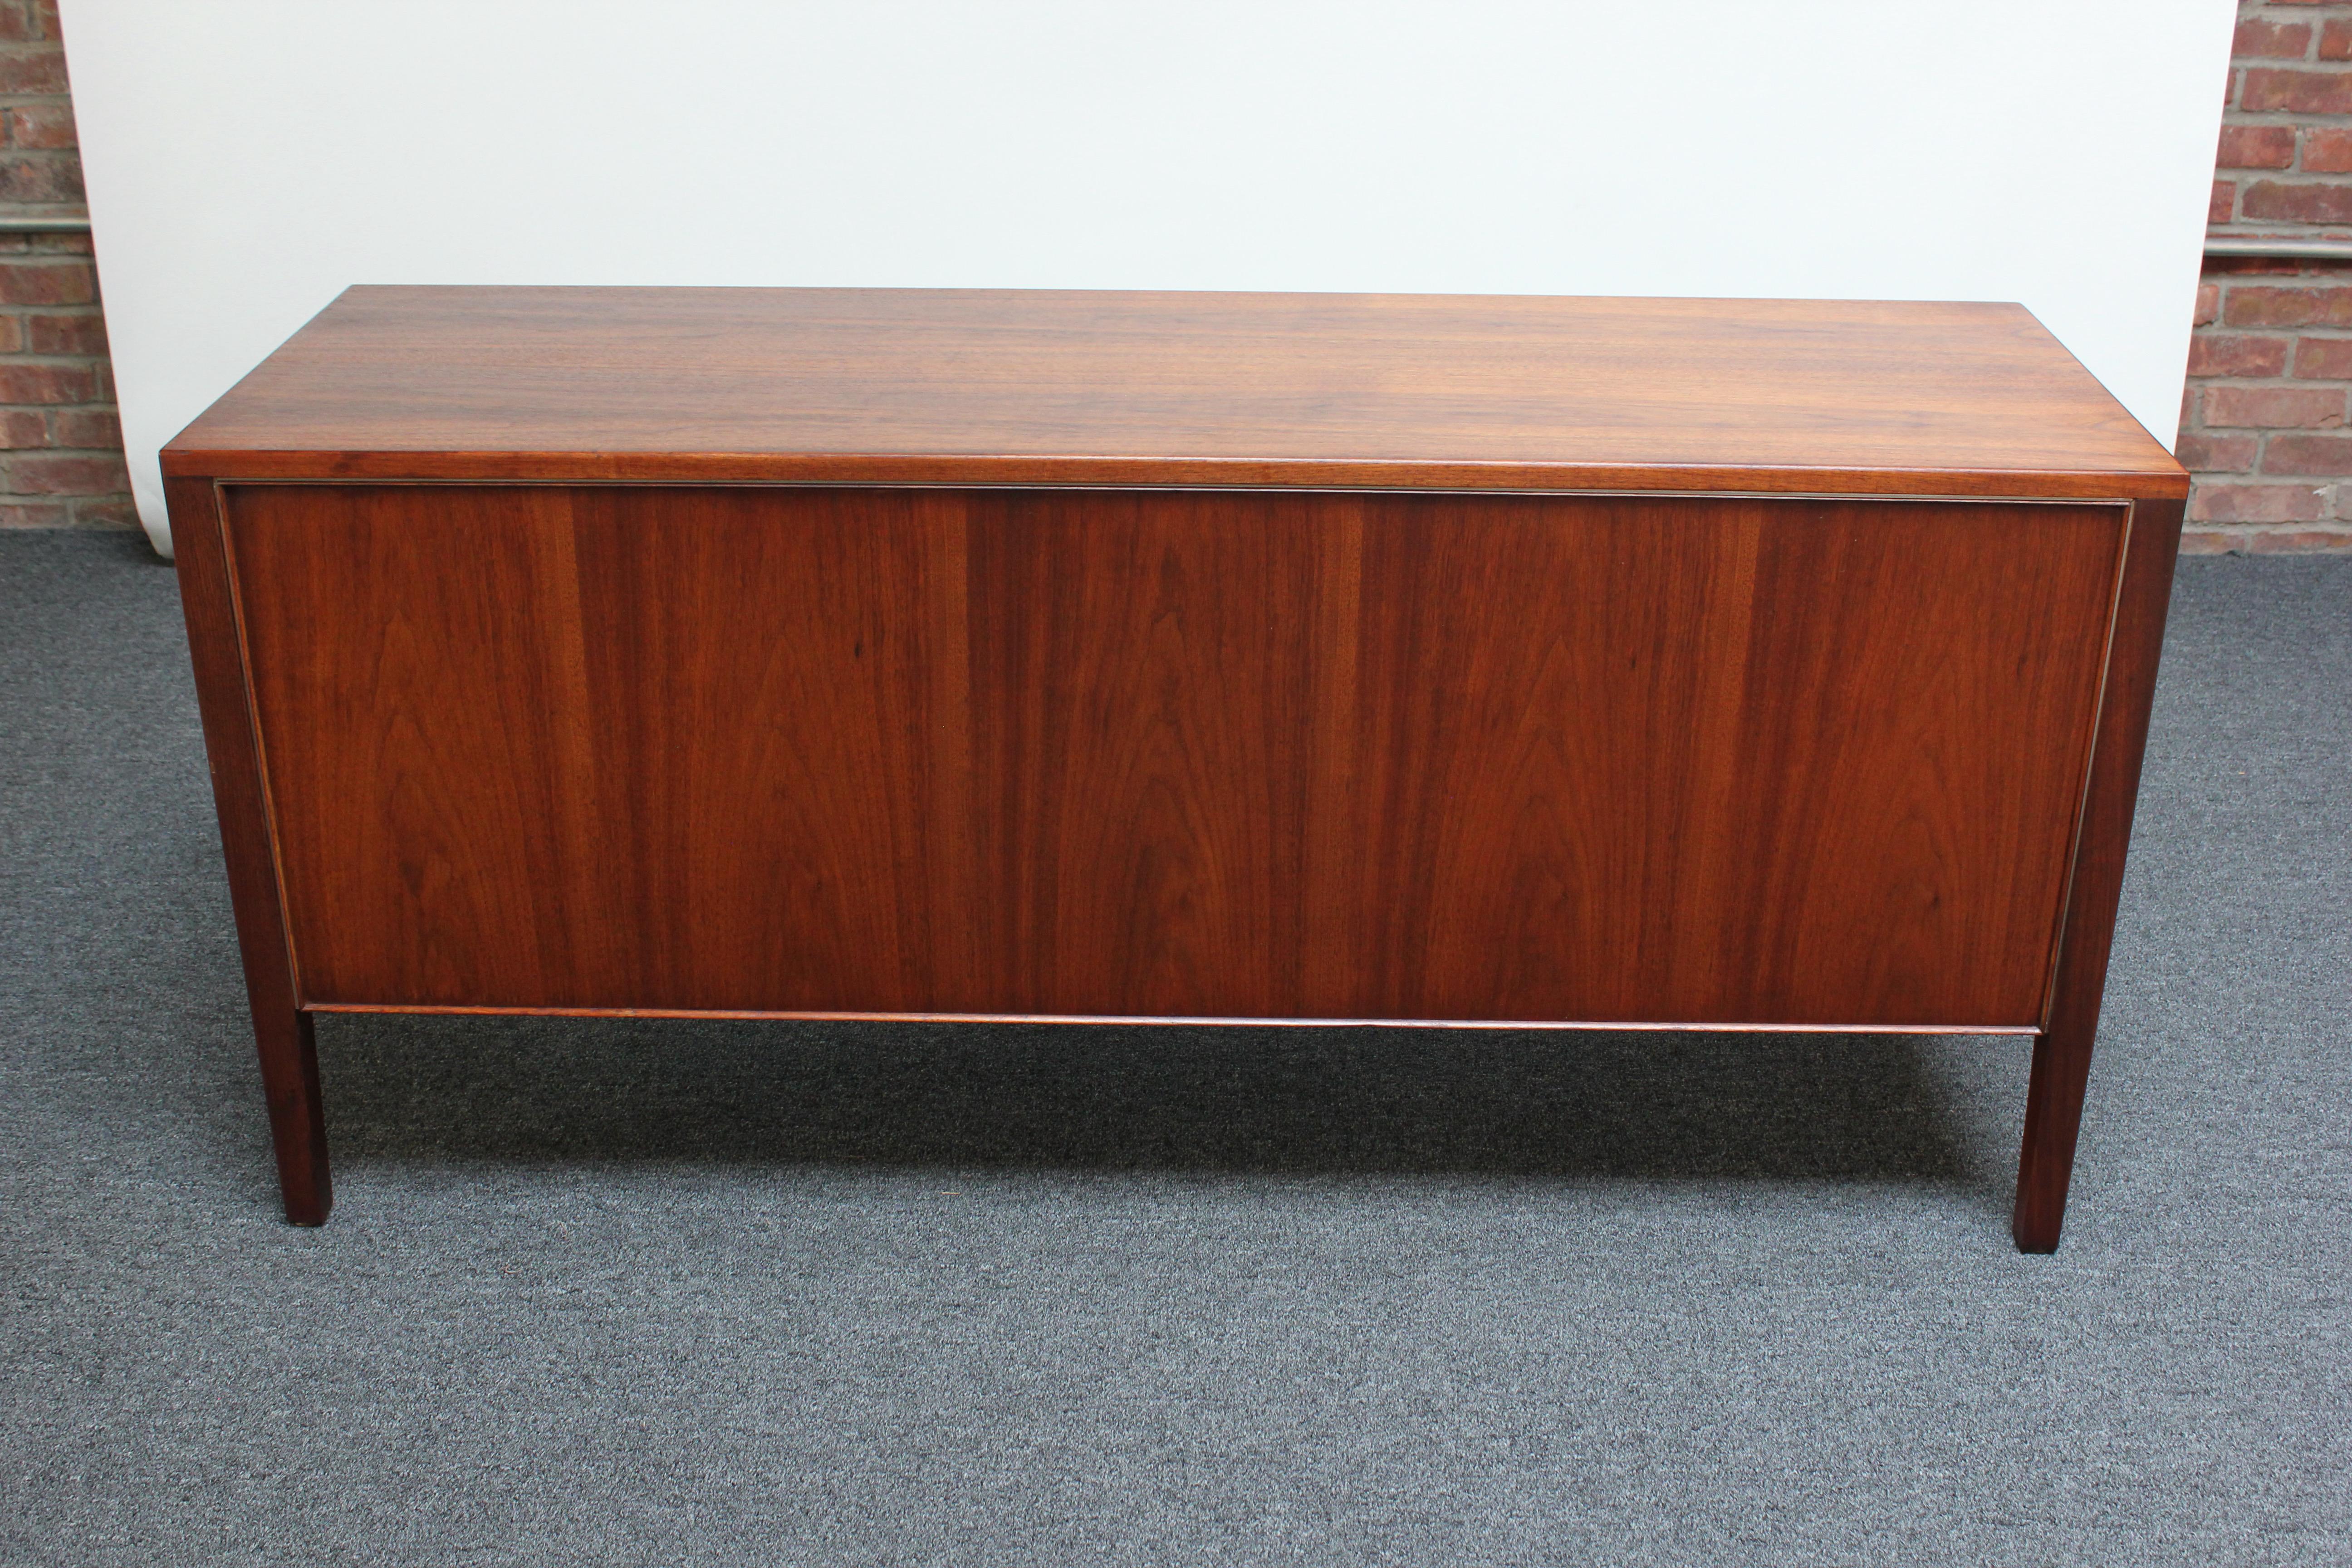 Mid-20th Century Petite Mid-Century Walnut Credenza / Dual Filing Cabinet by Stow Davis